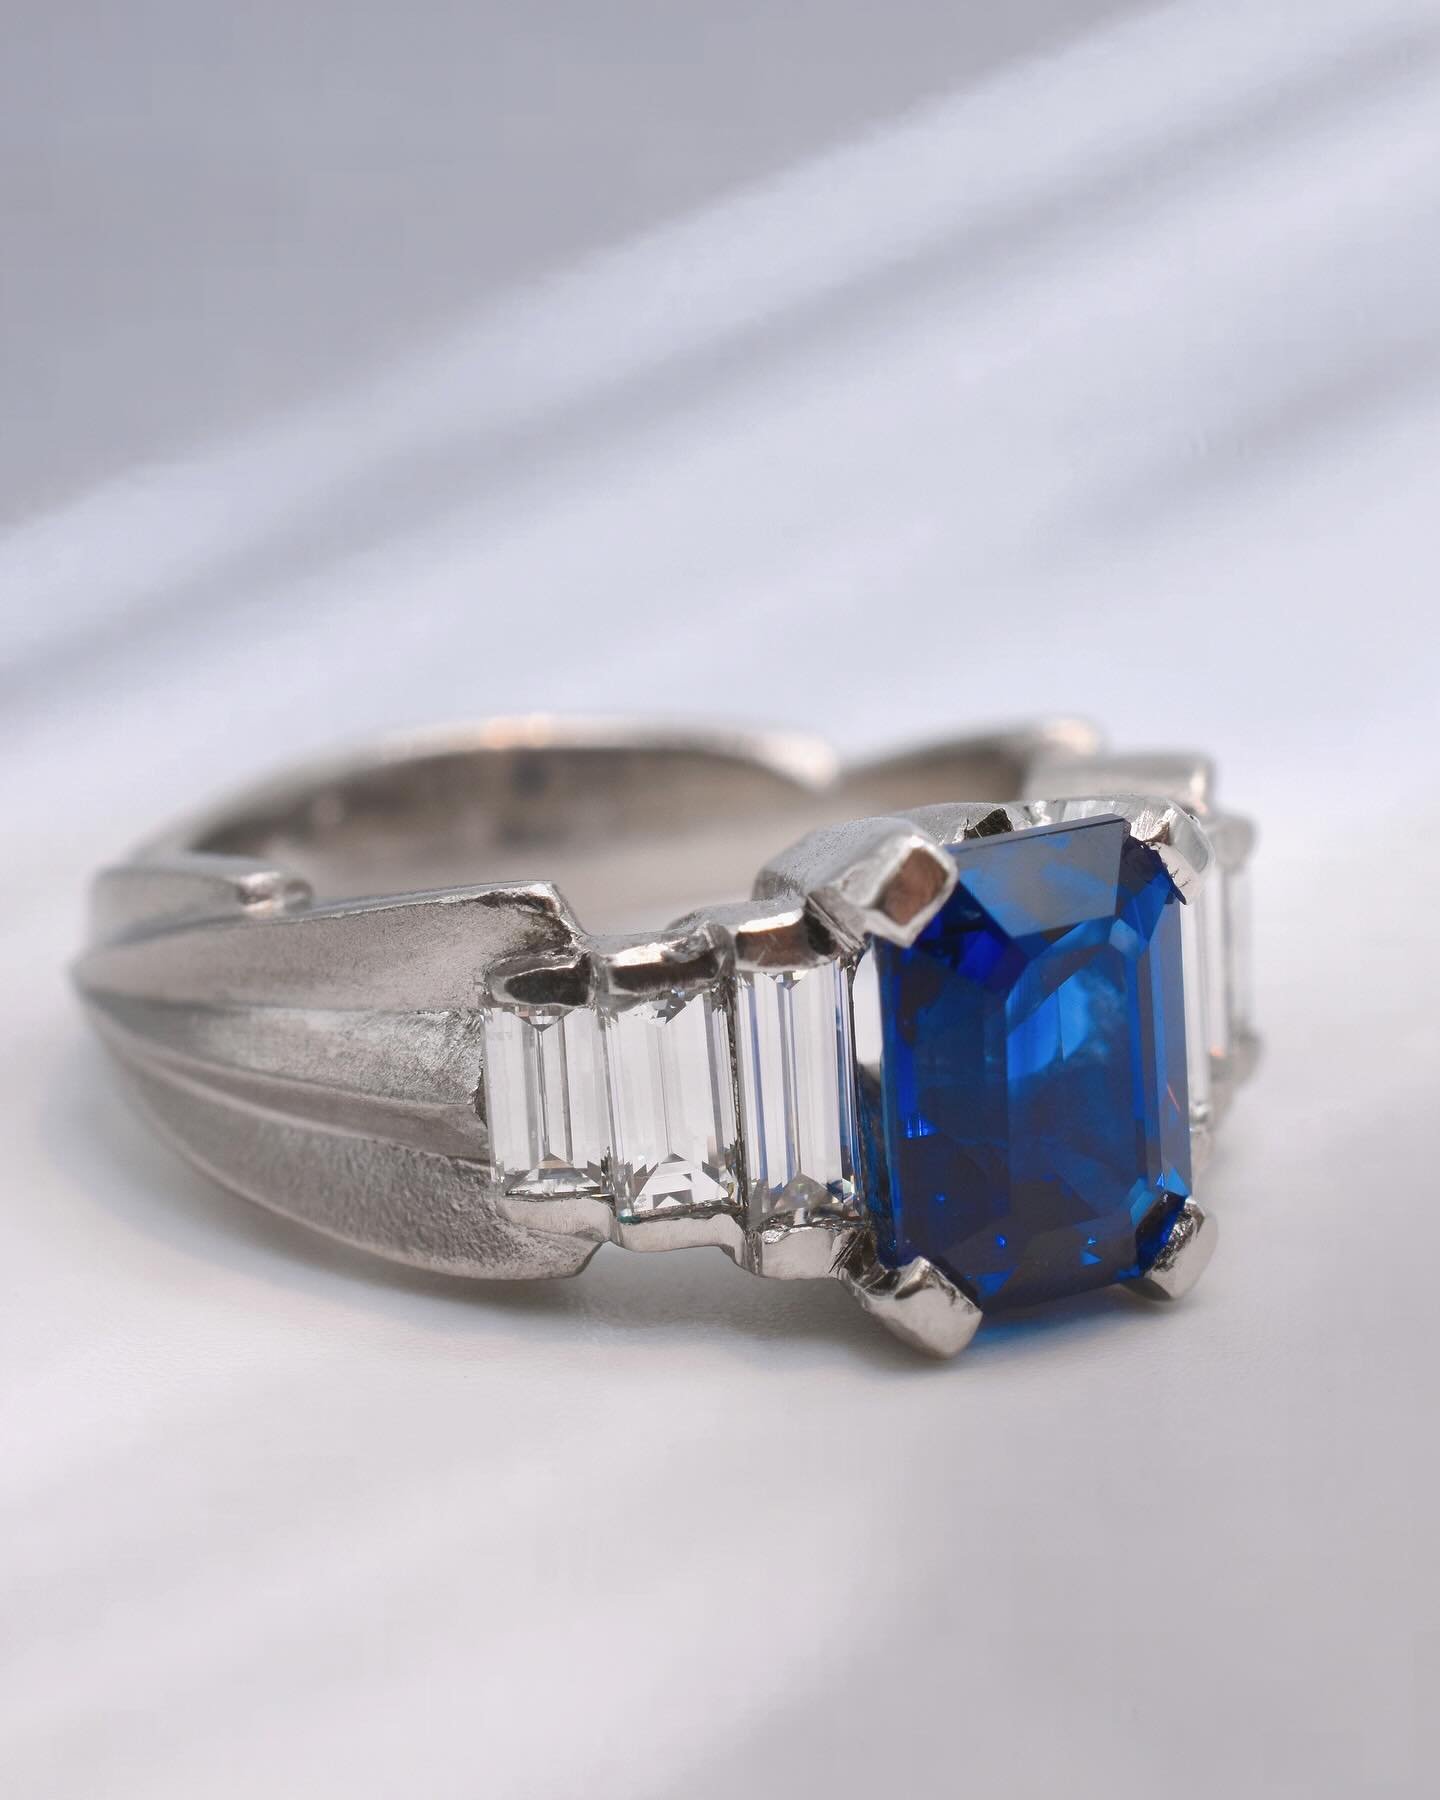 a very special custom Art Deco inspired engagement ring with an emerald cut sapphire and baguette side diamonds 💙